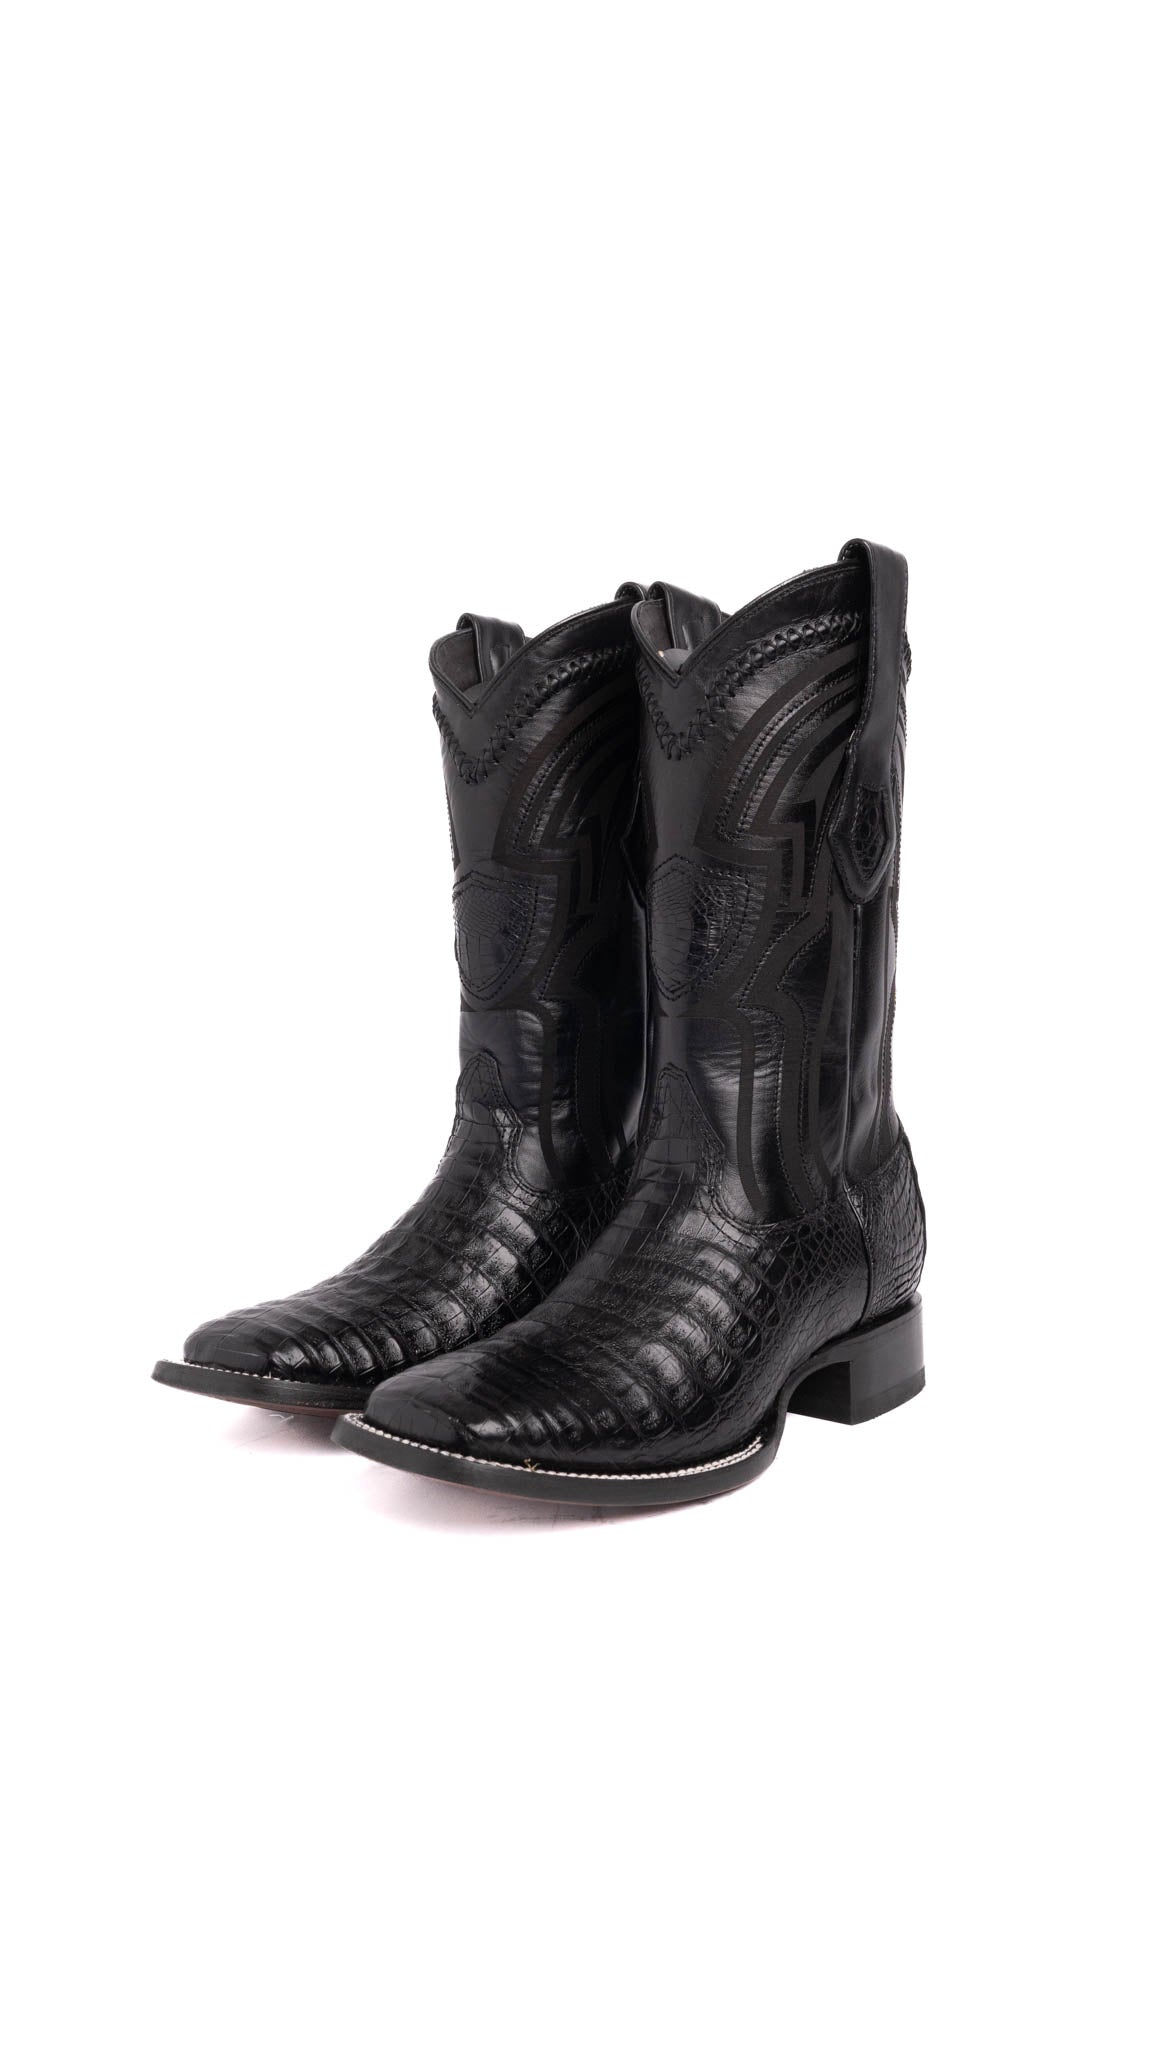 Caiman Belly Wild West Square Toe Cowboy Boot